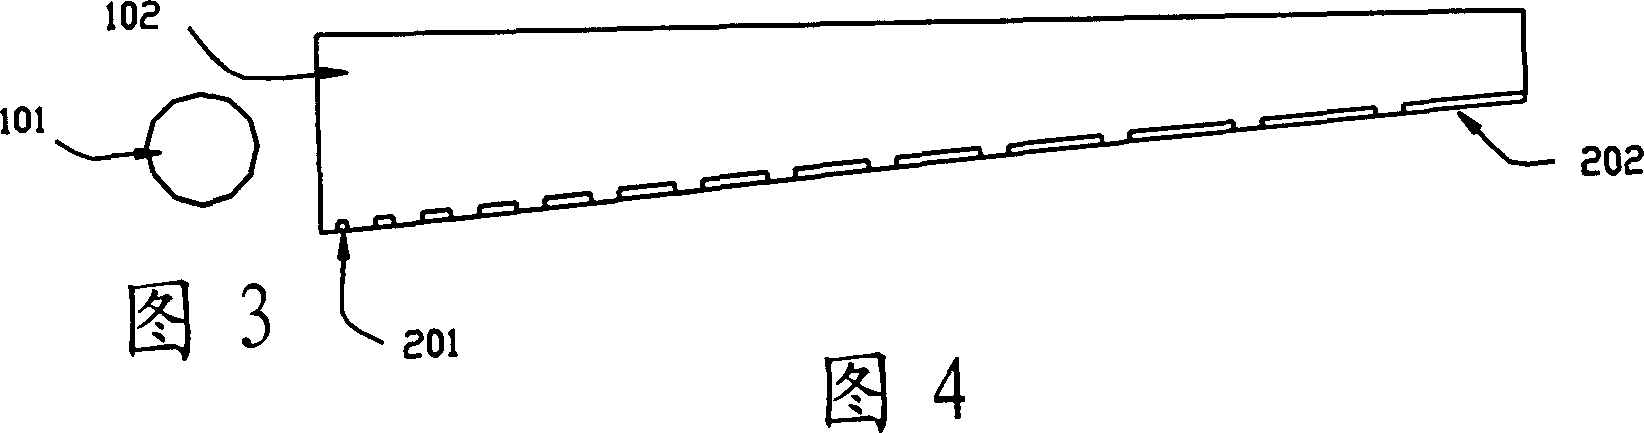 Light conducting plate structure